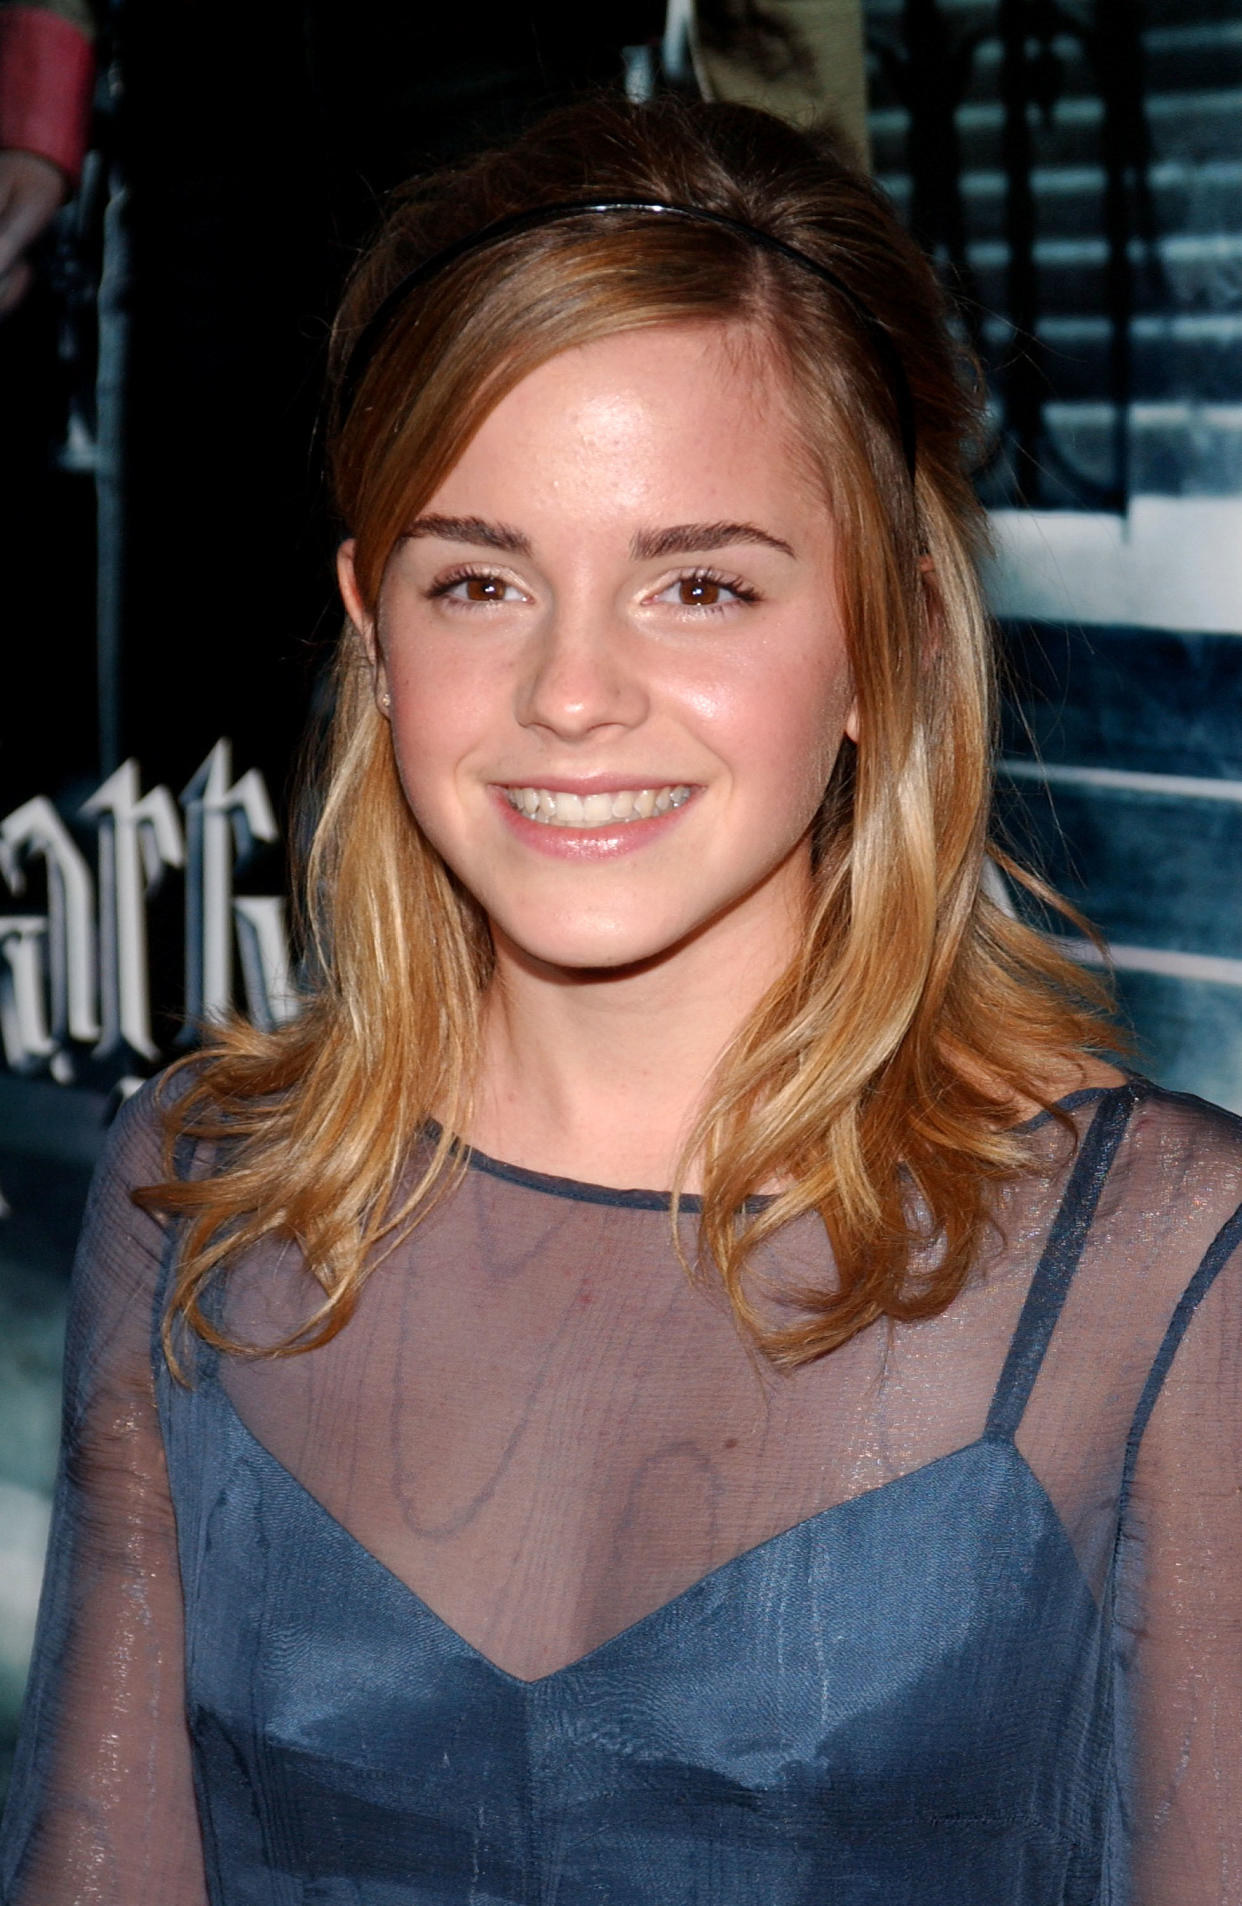 Emma Watson at the New York premiere of Harry Potter & The Goblet Of Fire in 2005. (Getty Images)